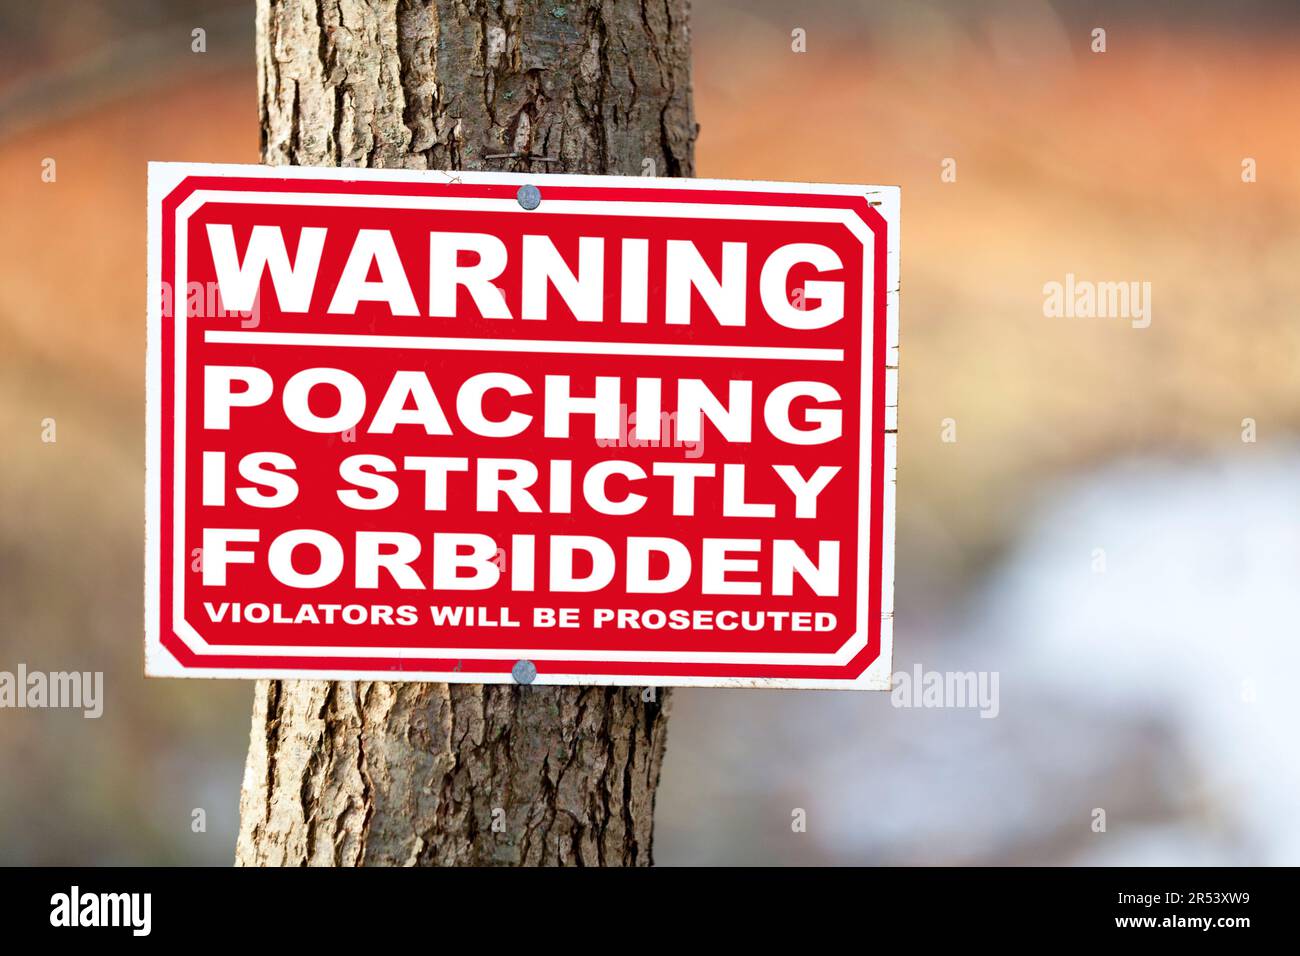 Sign nailed to a tree trunk saying 'Warning, poaching is strictly forbidden, violators will be prosecuted'. Stock Photo